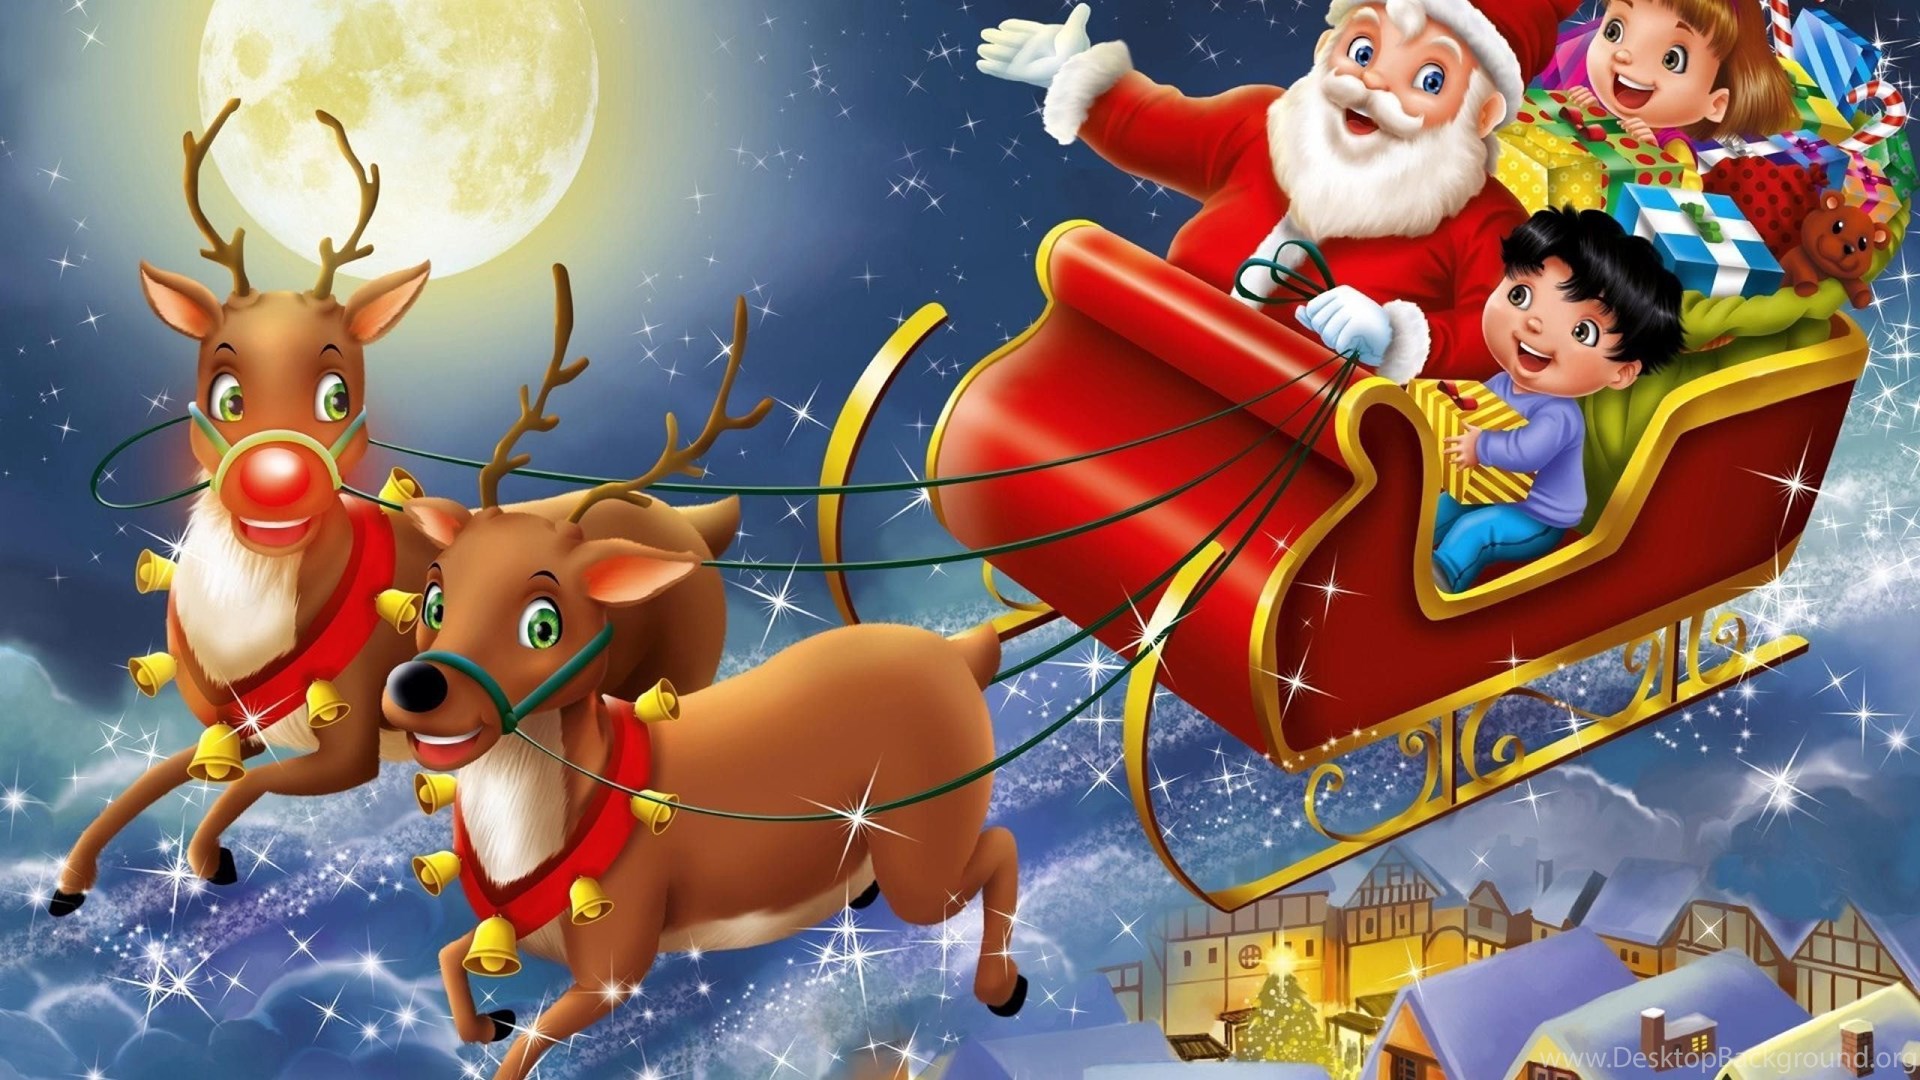 Funny Santa Cartoon Images Pictures Of Santas Sleigh